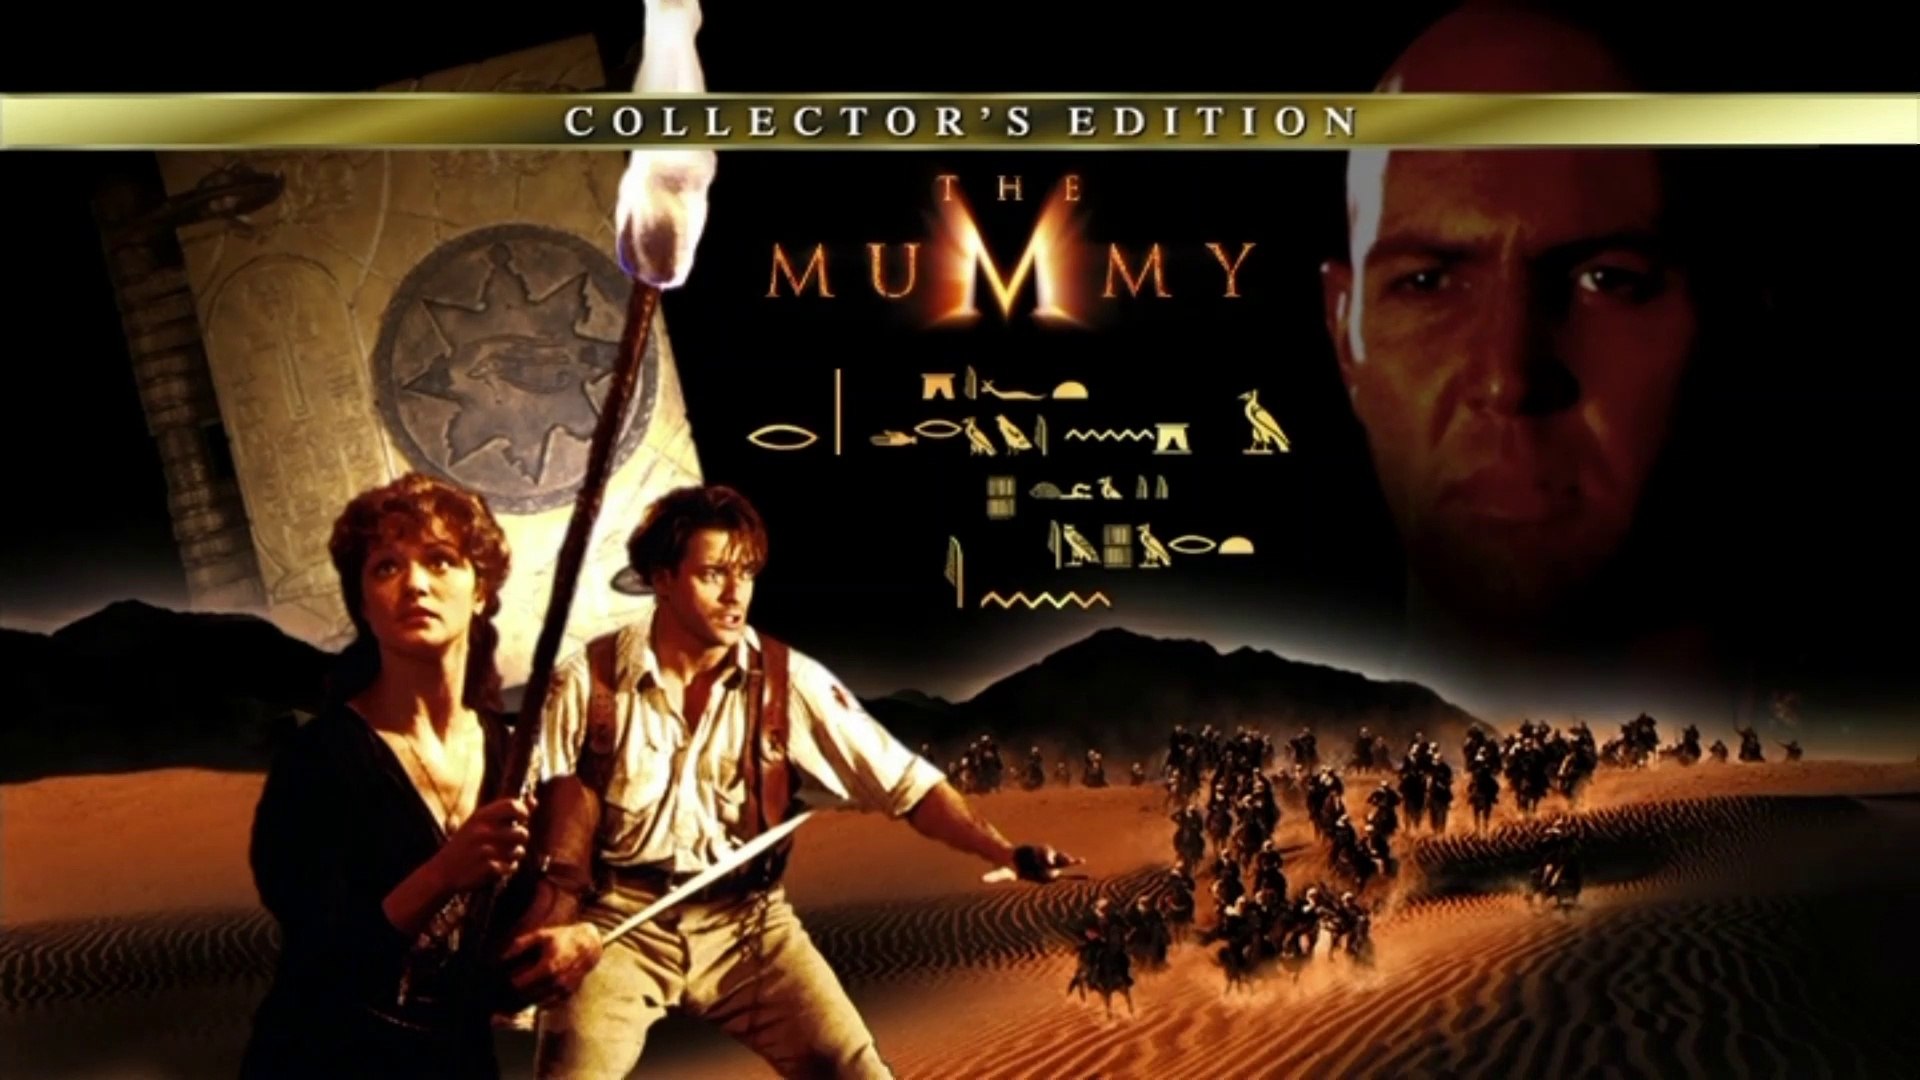 Opening/Closing to The Mummy 1999 DVD (HD) - video Dailymotion